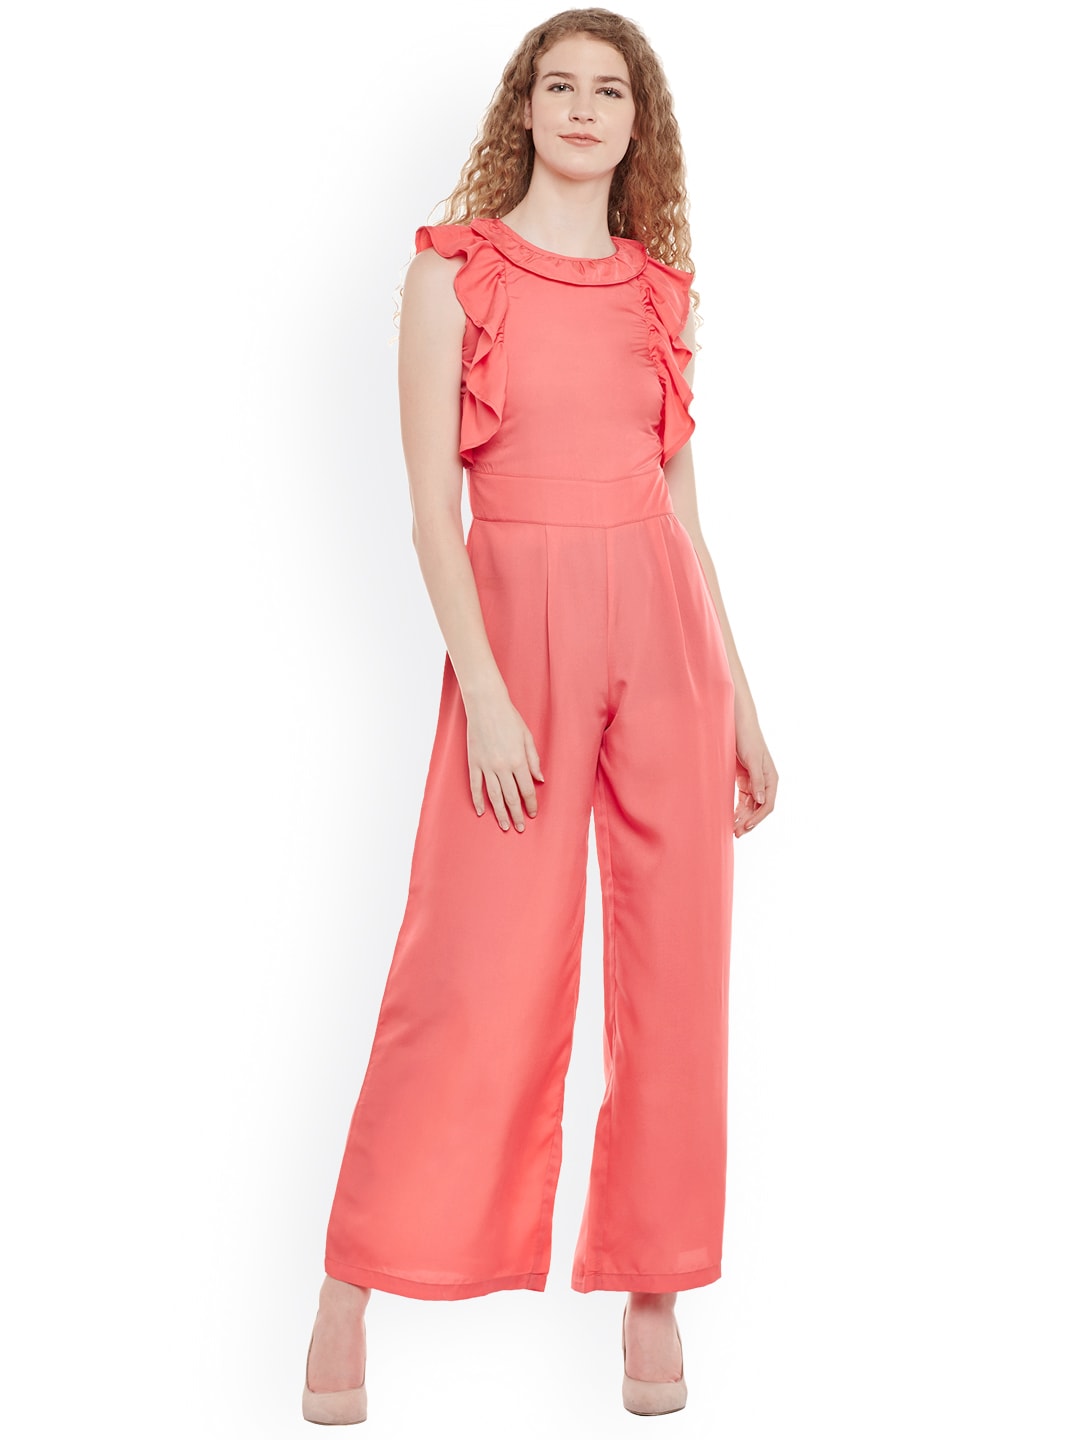 Belle Fille Coral Pink Jumpsuit Price in India